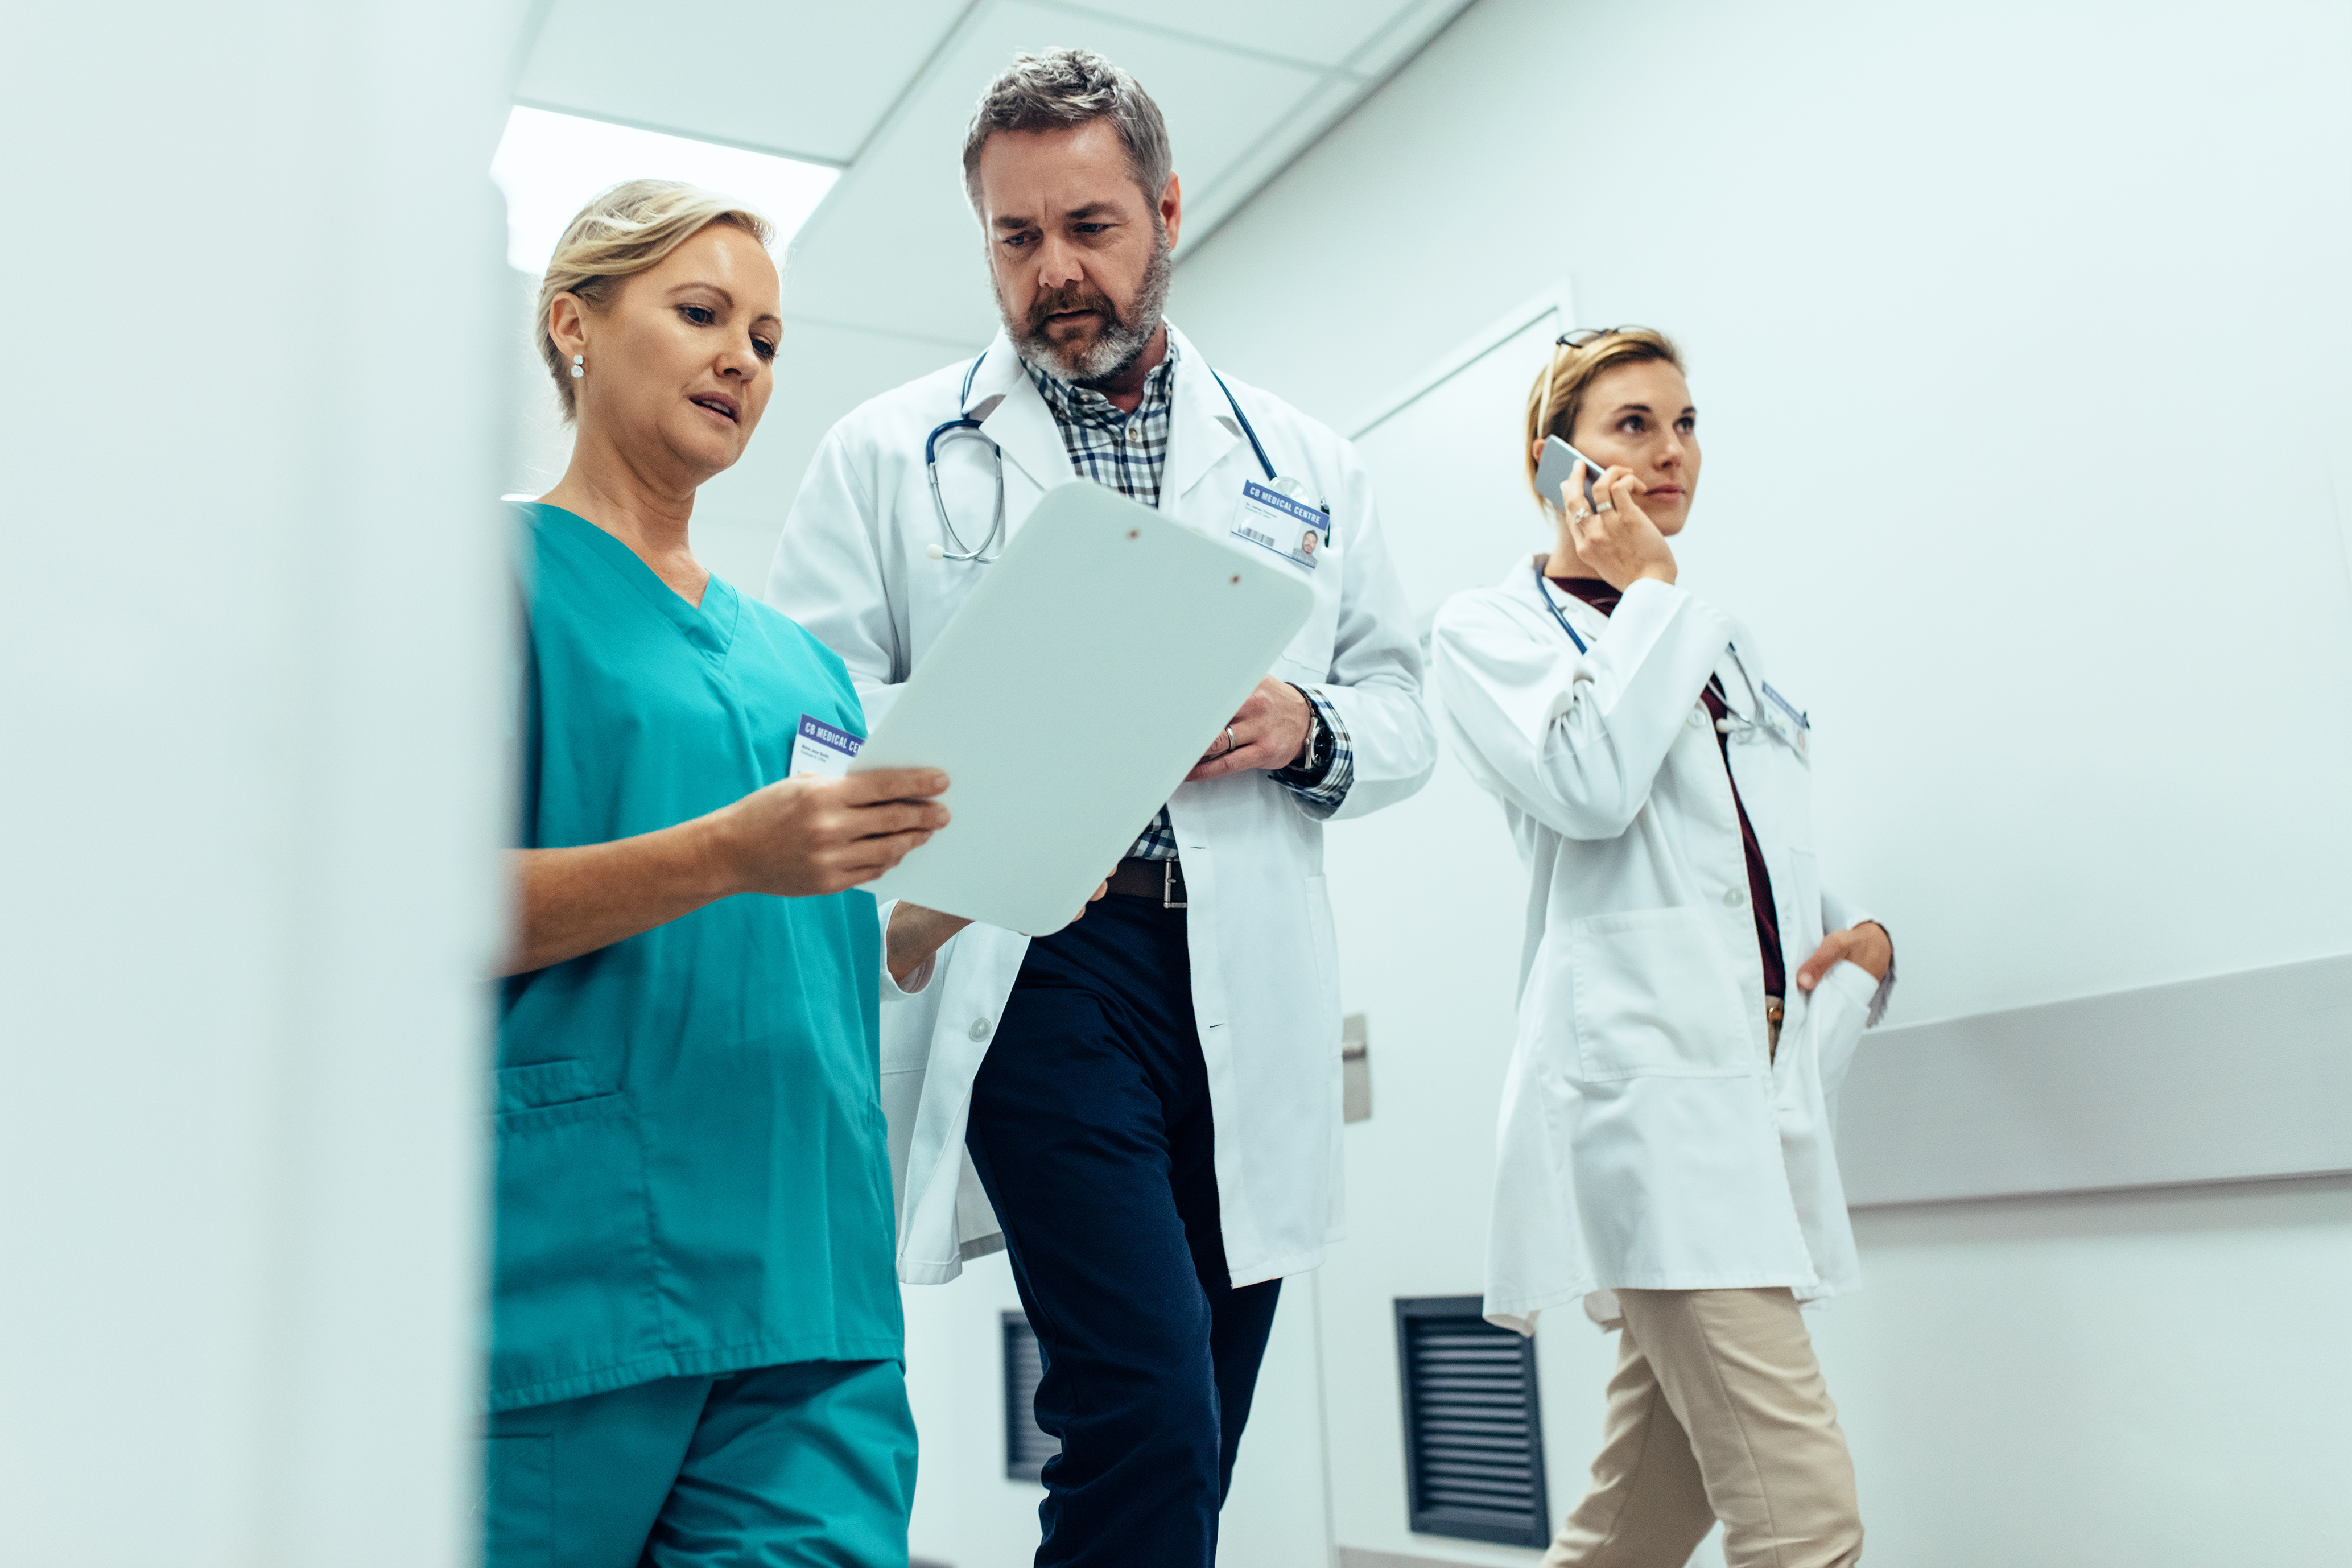 Virtual medical scribes can help revolutionize healthcare efficiency, improve patient satisfaction, and deliver timely care by addressing appointment backlogs.